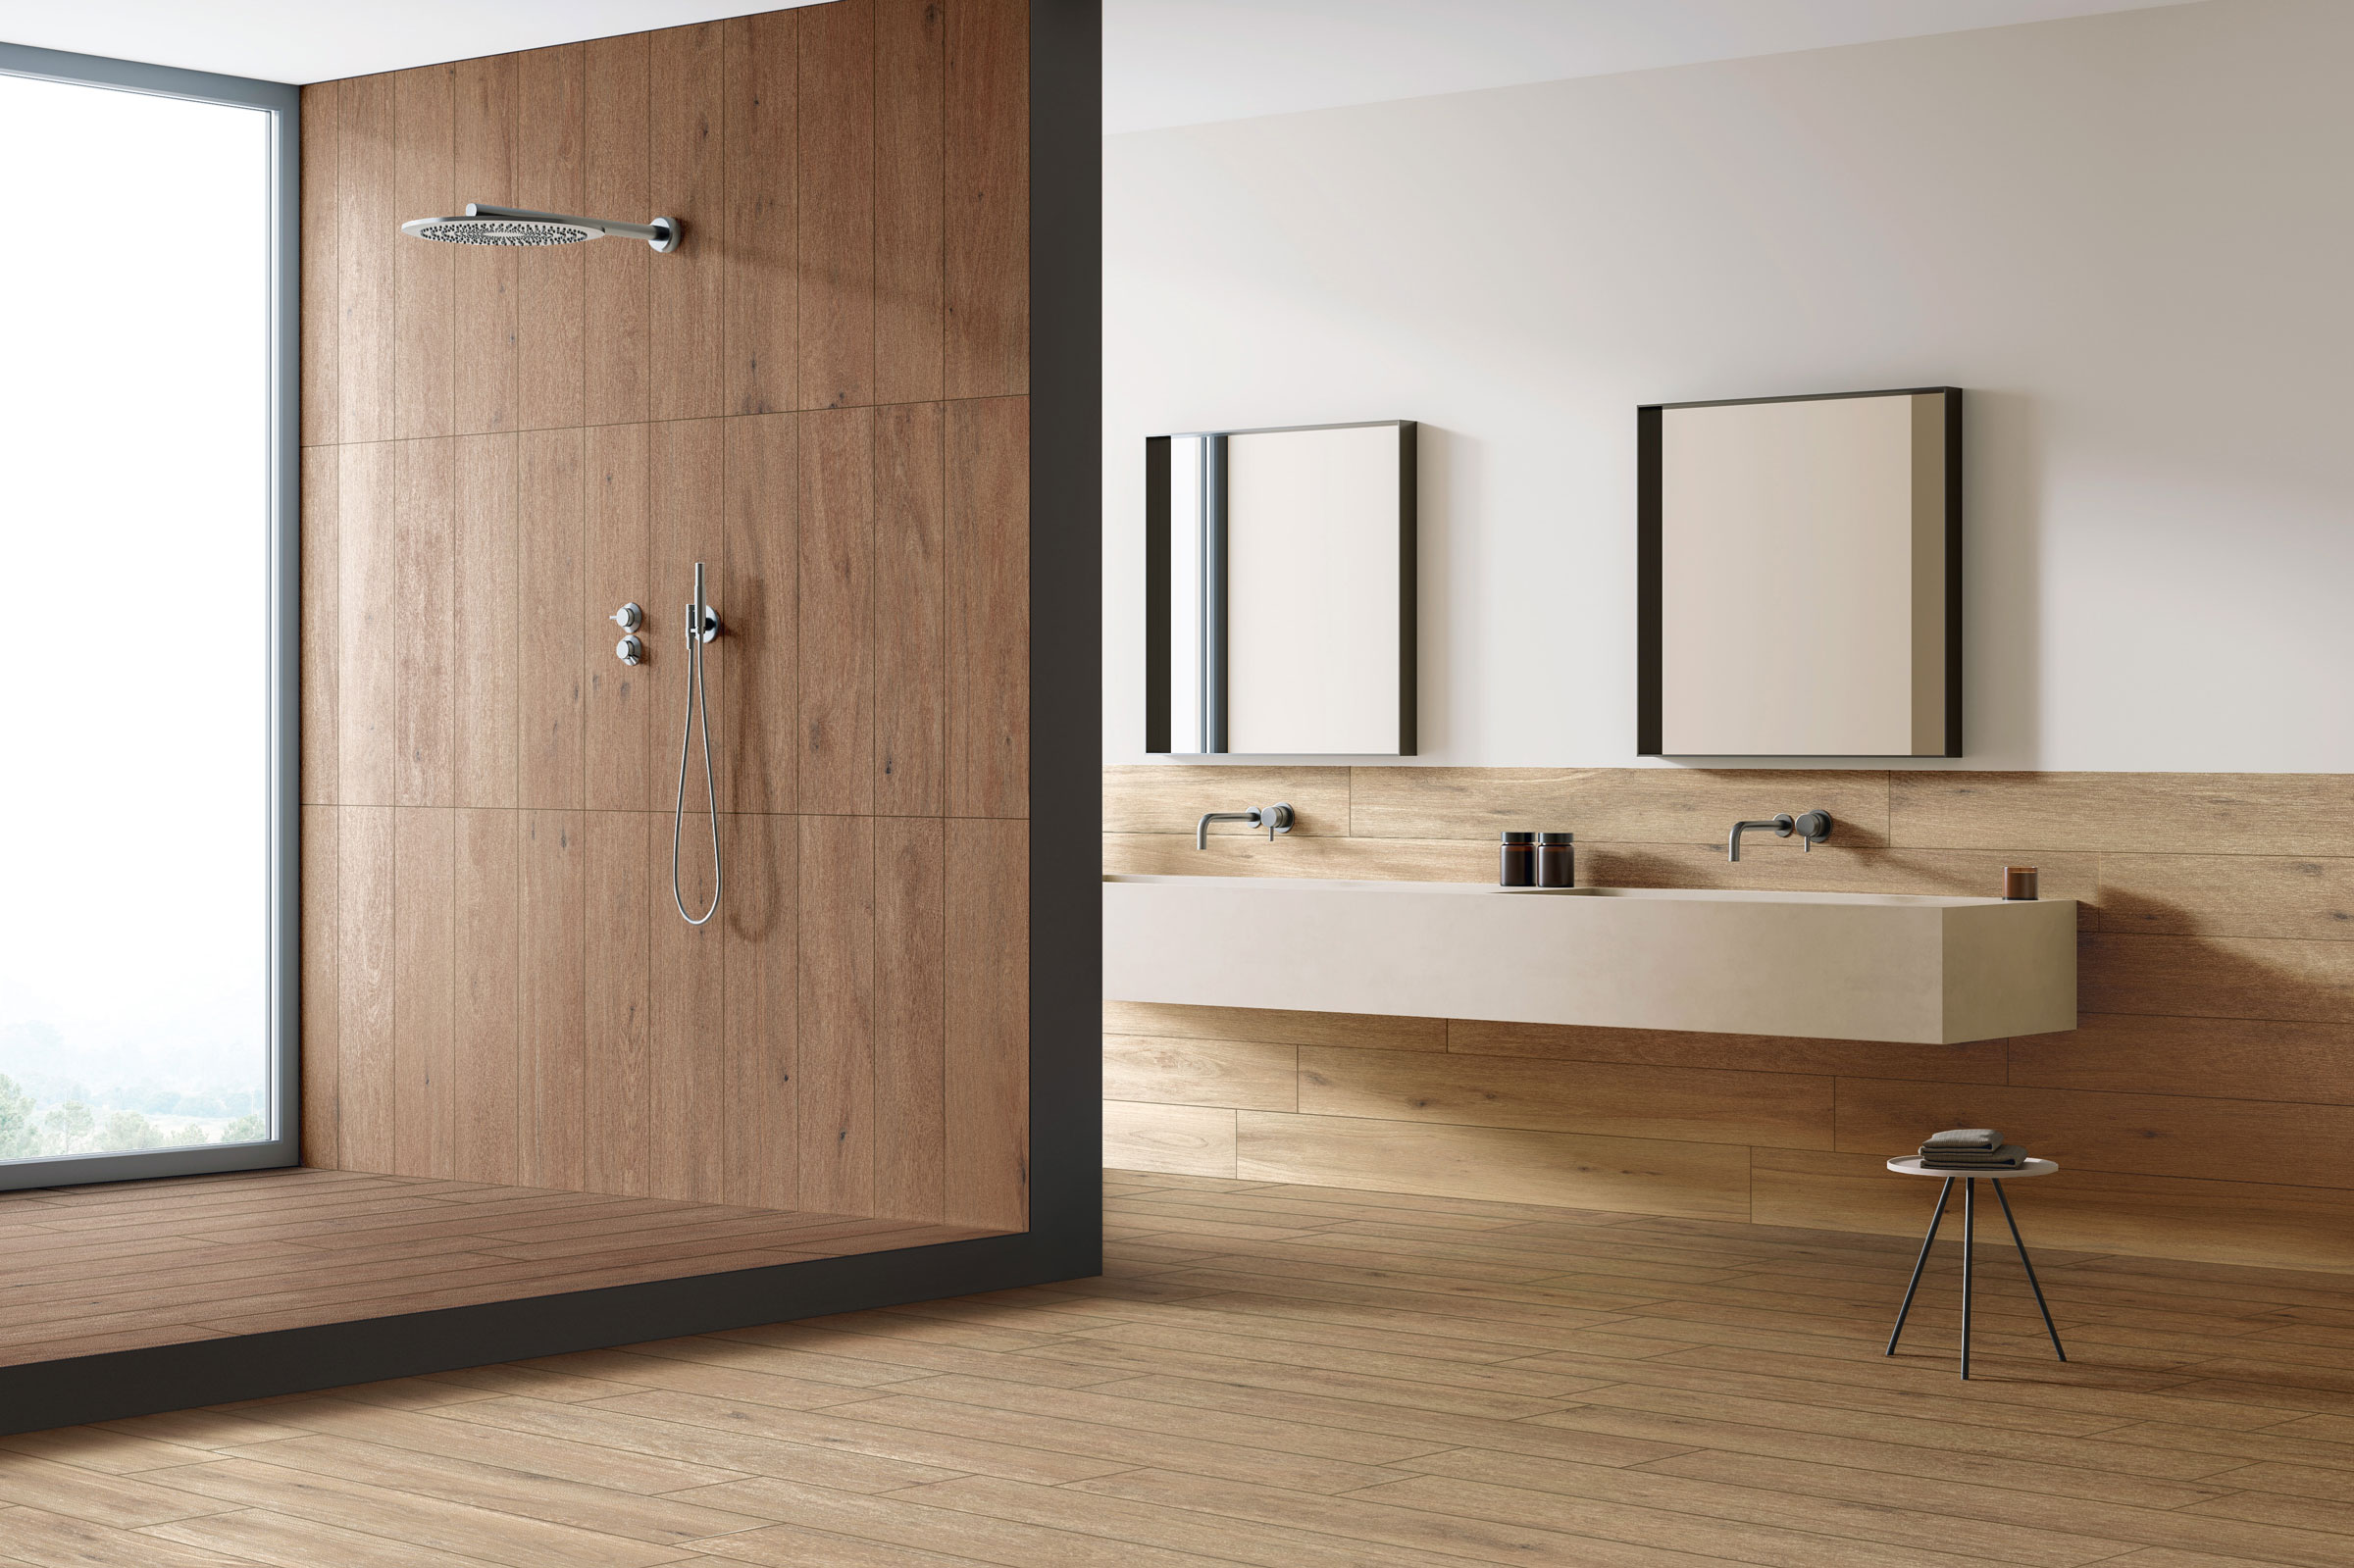 4 Steps to Sustainable Bathroom Design for Commercial and Residential